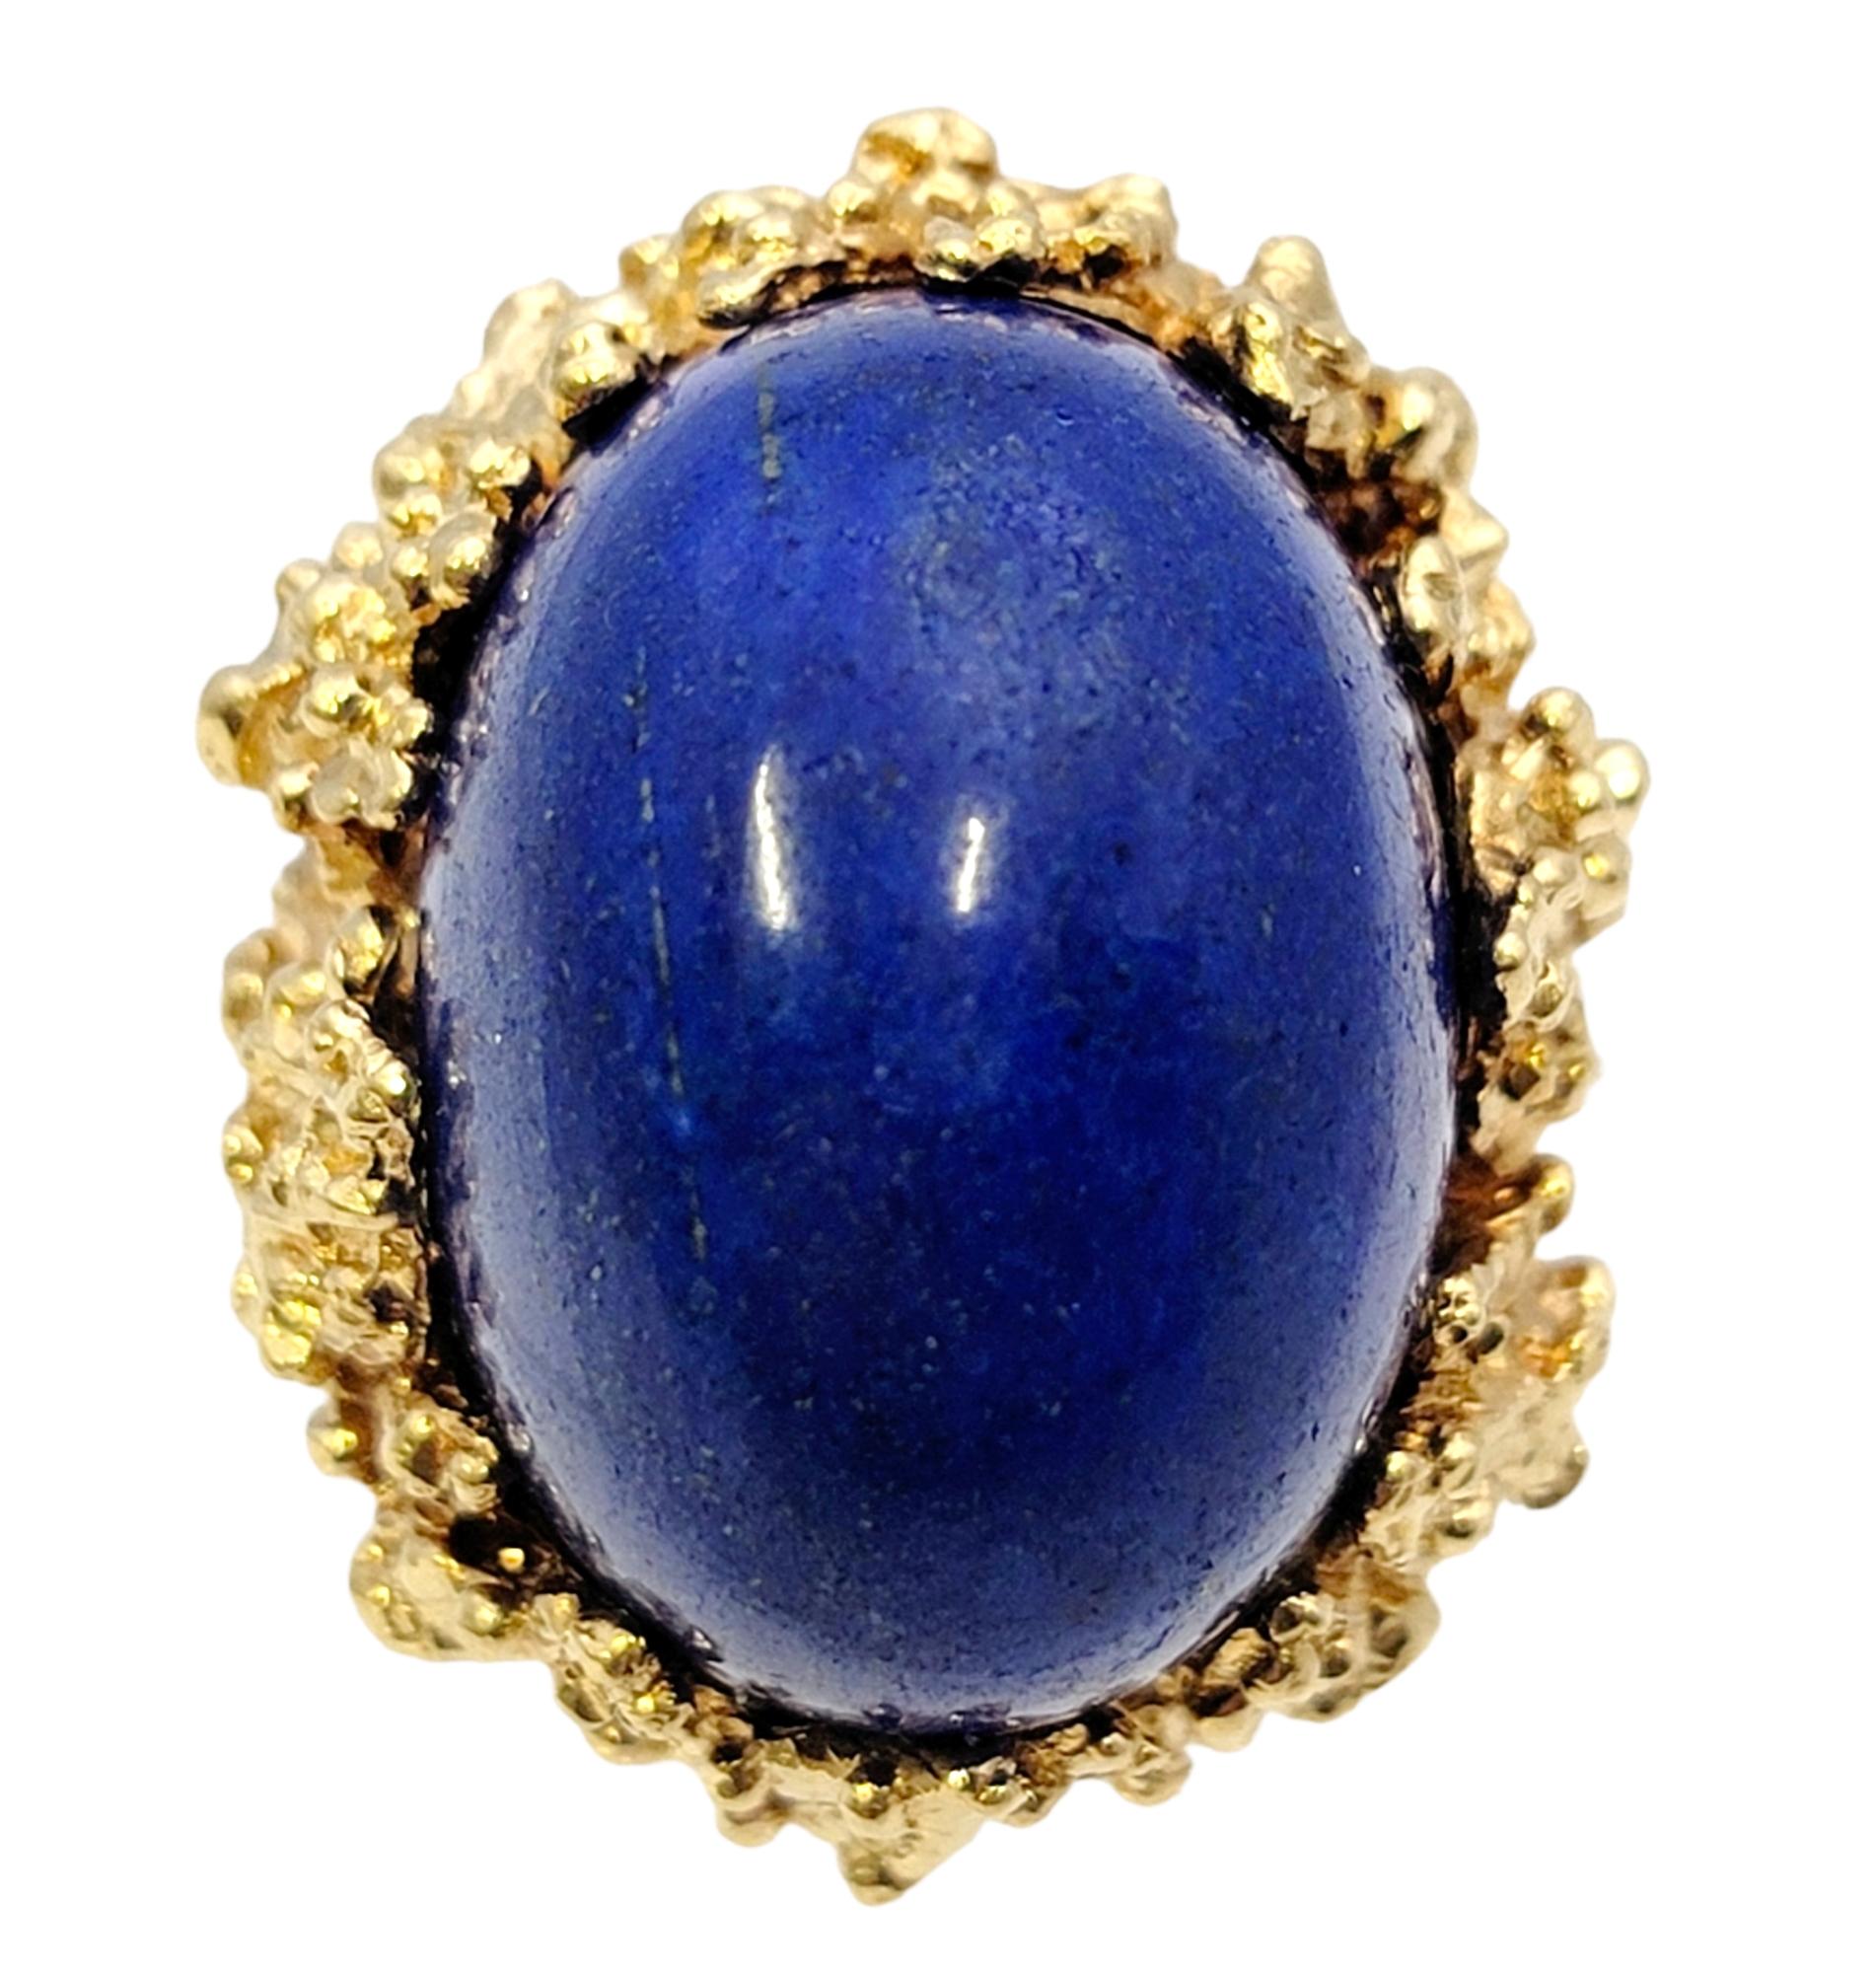 Ring size: 5

This spectacularly bold and beautiful domed cocktail ring is sure to impress. The massive natural lapis stone sits high off the finger, demanding the viewers attention, while the rest of the piece fills the finger from end to end with